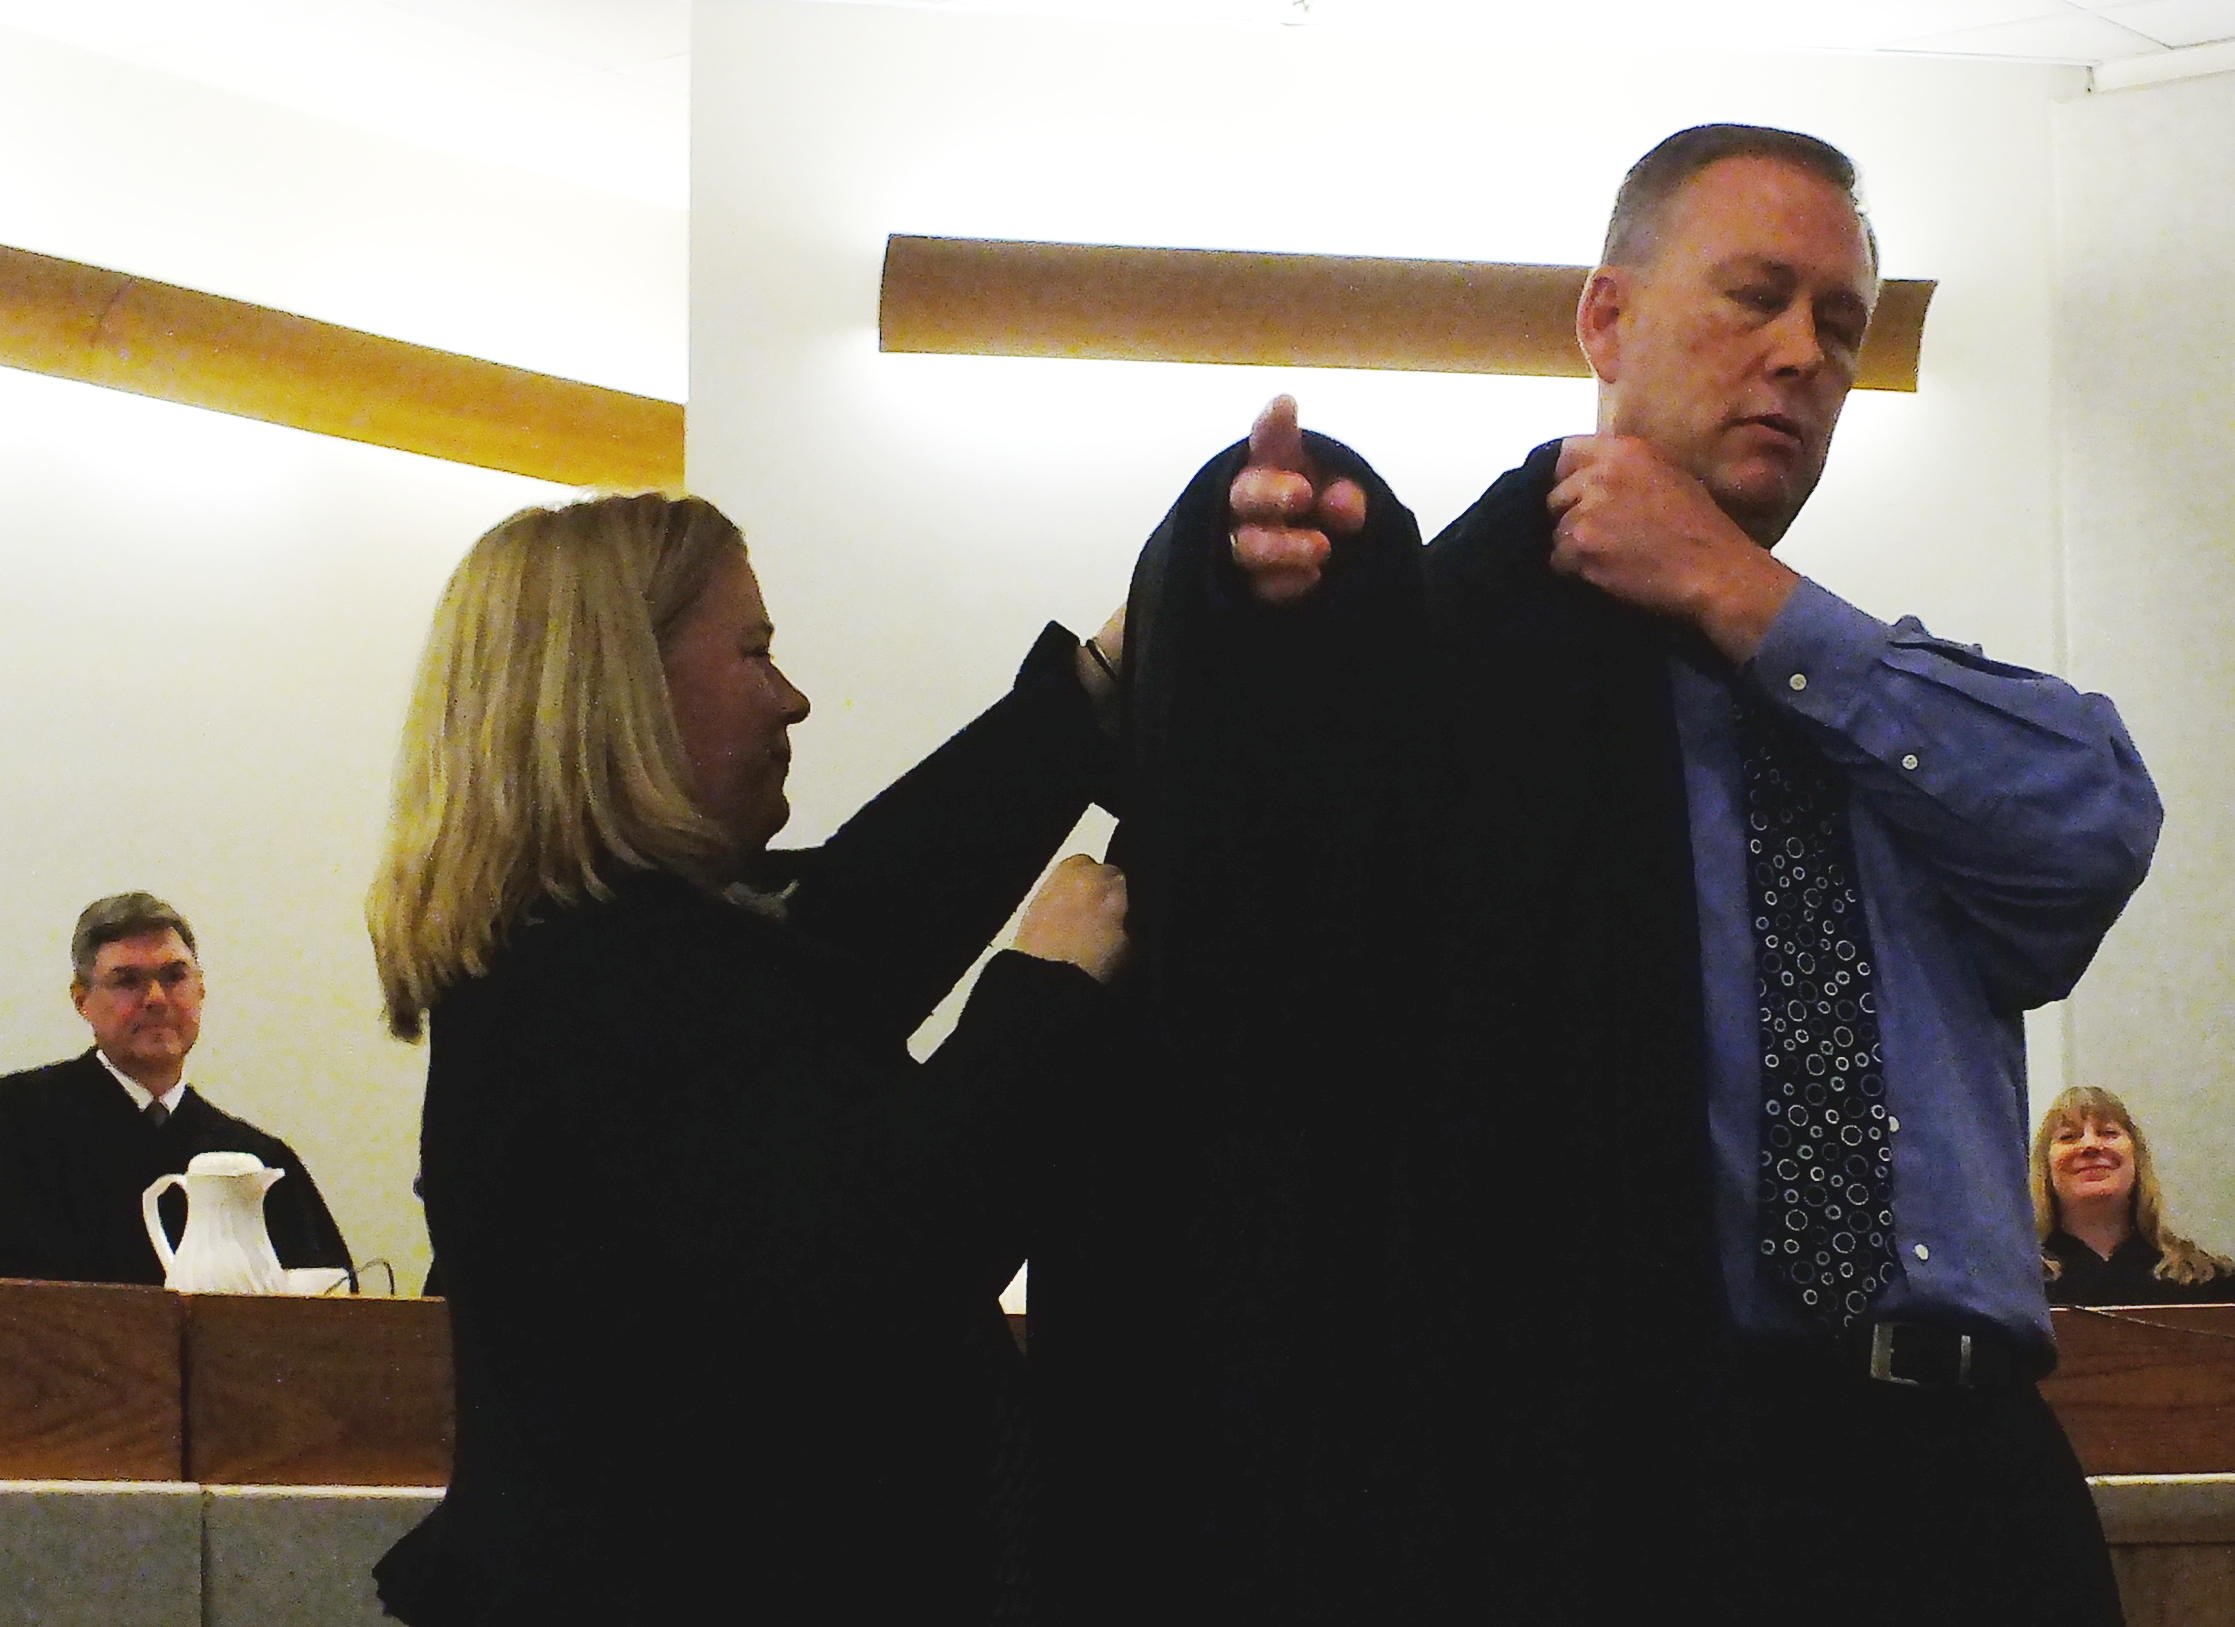 Juneau Superior Court Judge Daniel Schally dons the judicial robe with the help of his cousin Catherine O'Connor who traveled from Ireland to attend his installation ceremony March 29, 2019 at the Dimond Courthouse. (Photo by Matt Miller/KTOO)